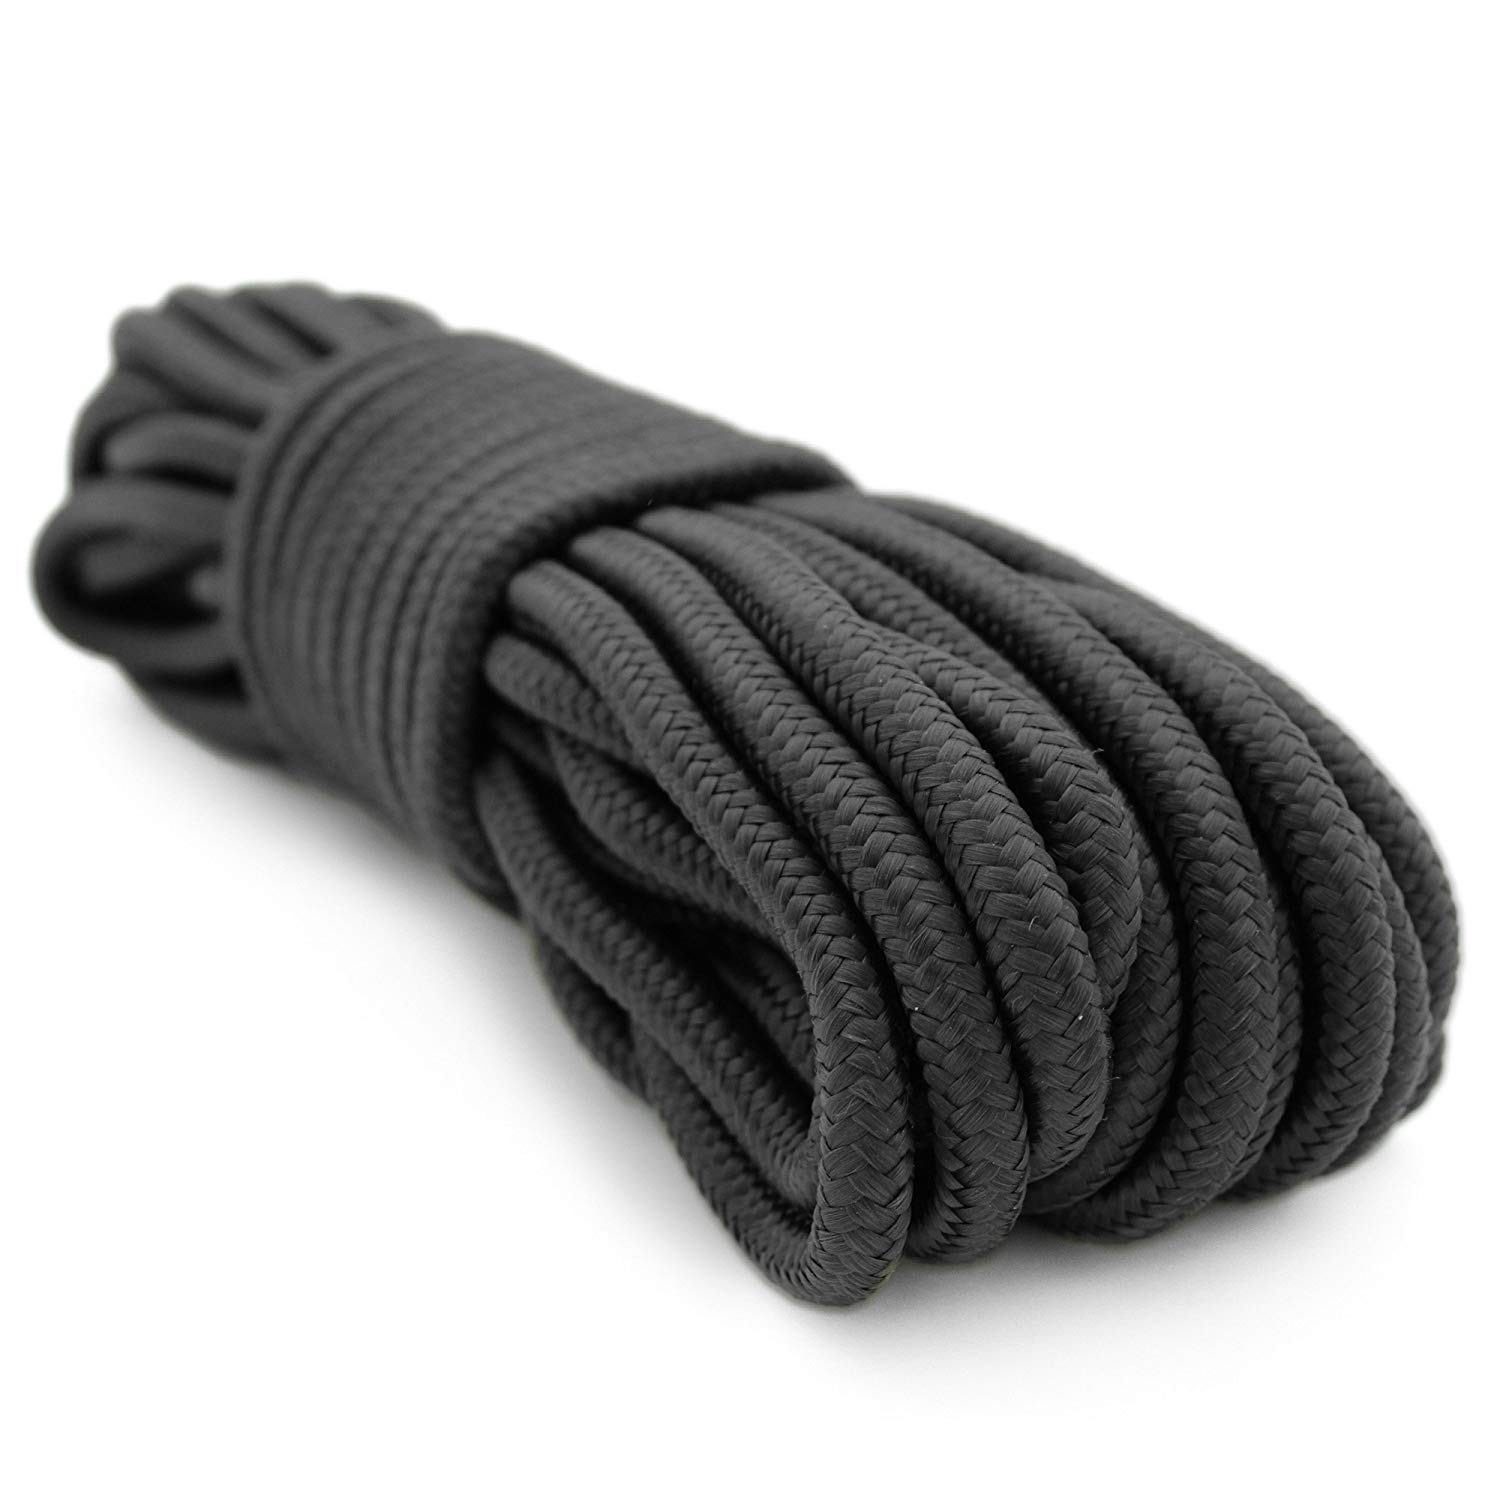 Amazon.com: 3/8 Inch 50 Foot Rope, Black, Camping Rope: Home Improvement